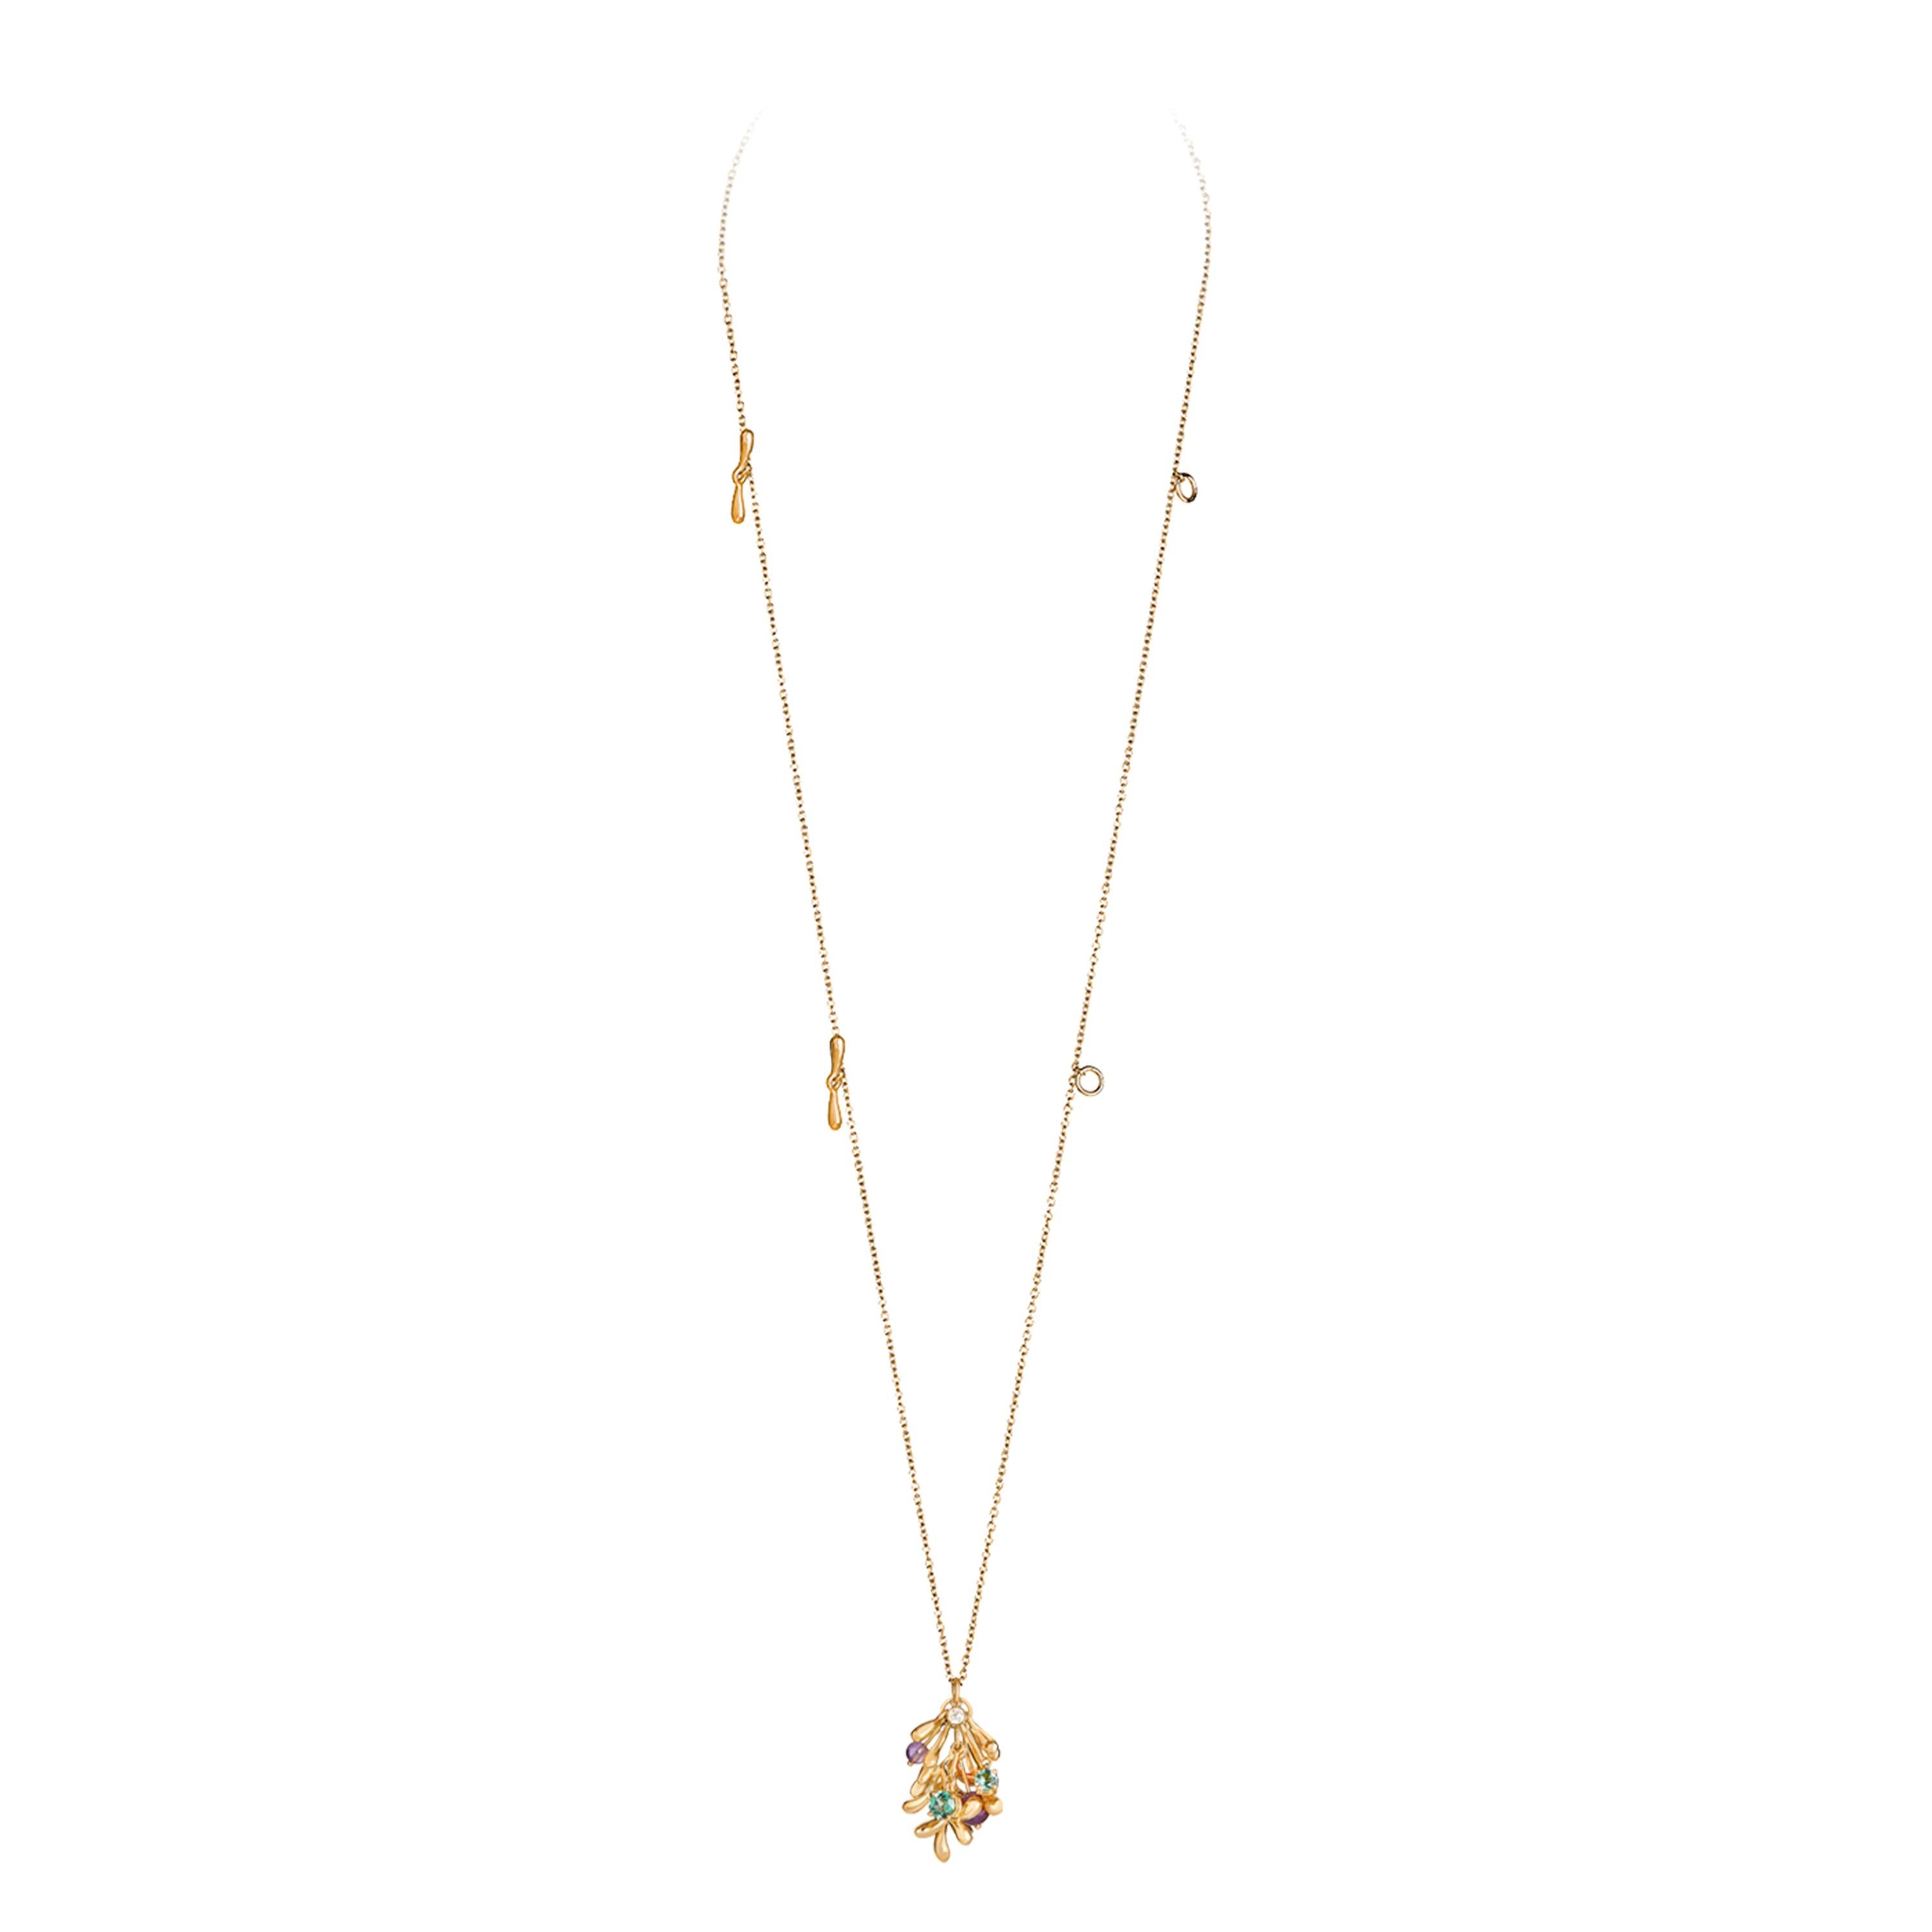 Springing forth from a lush magical wilderness is the JungleRemix Pendant Necklace with its clusters of gold leaves with well-rounded tips jingling and jangling to mimic the swaying movements of exotic flora in the heart of the rainforest. Cast as